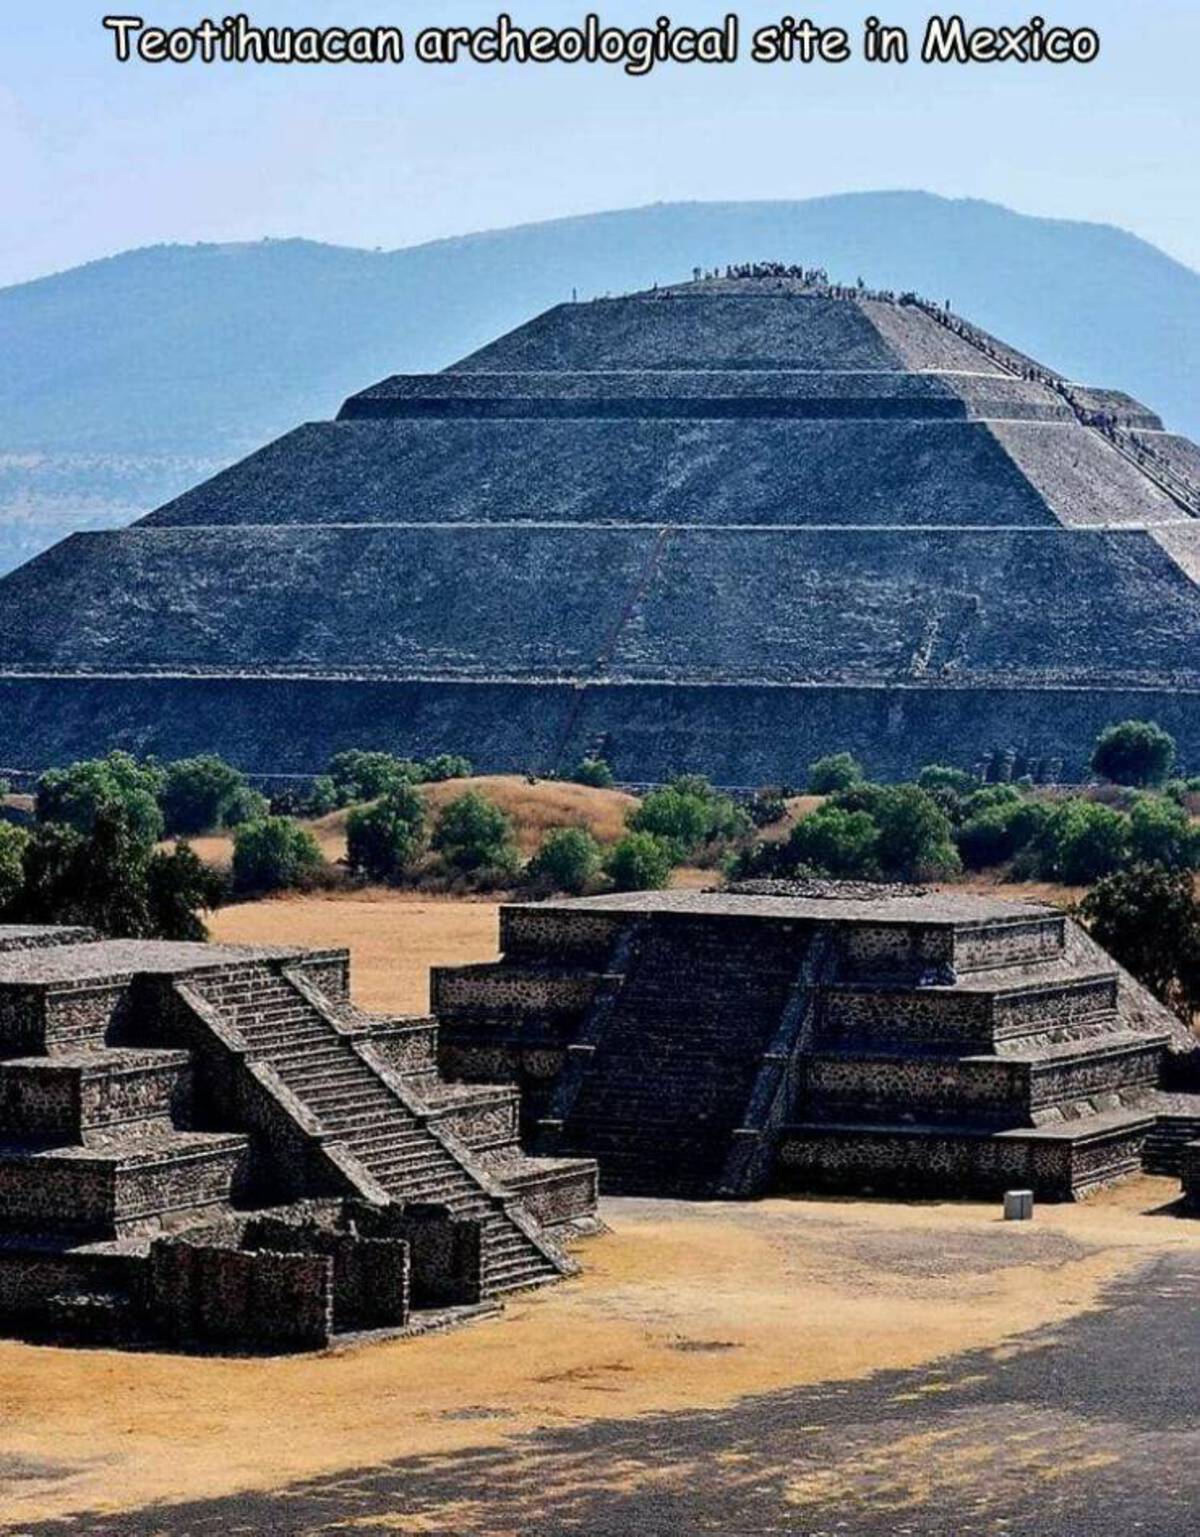 pyramids in mexico city - Teotihuacan archeological site in Mexico